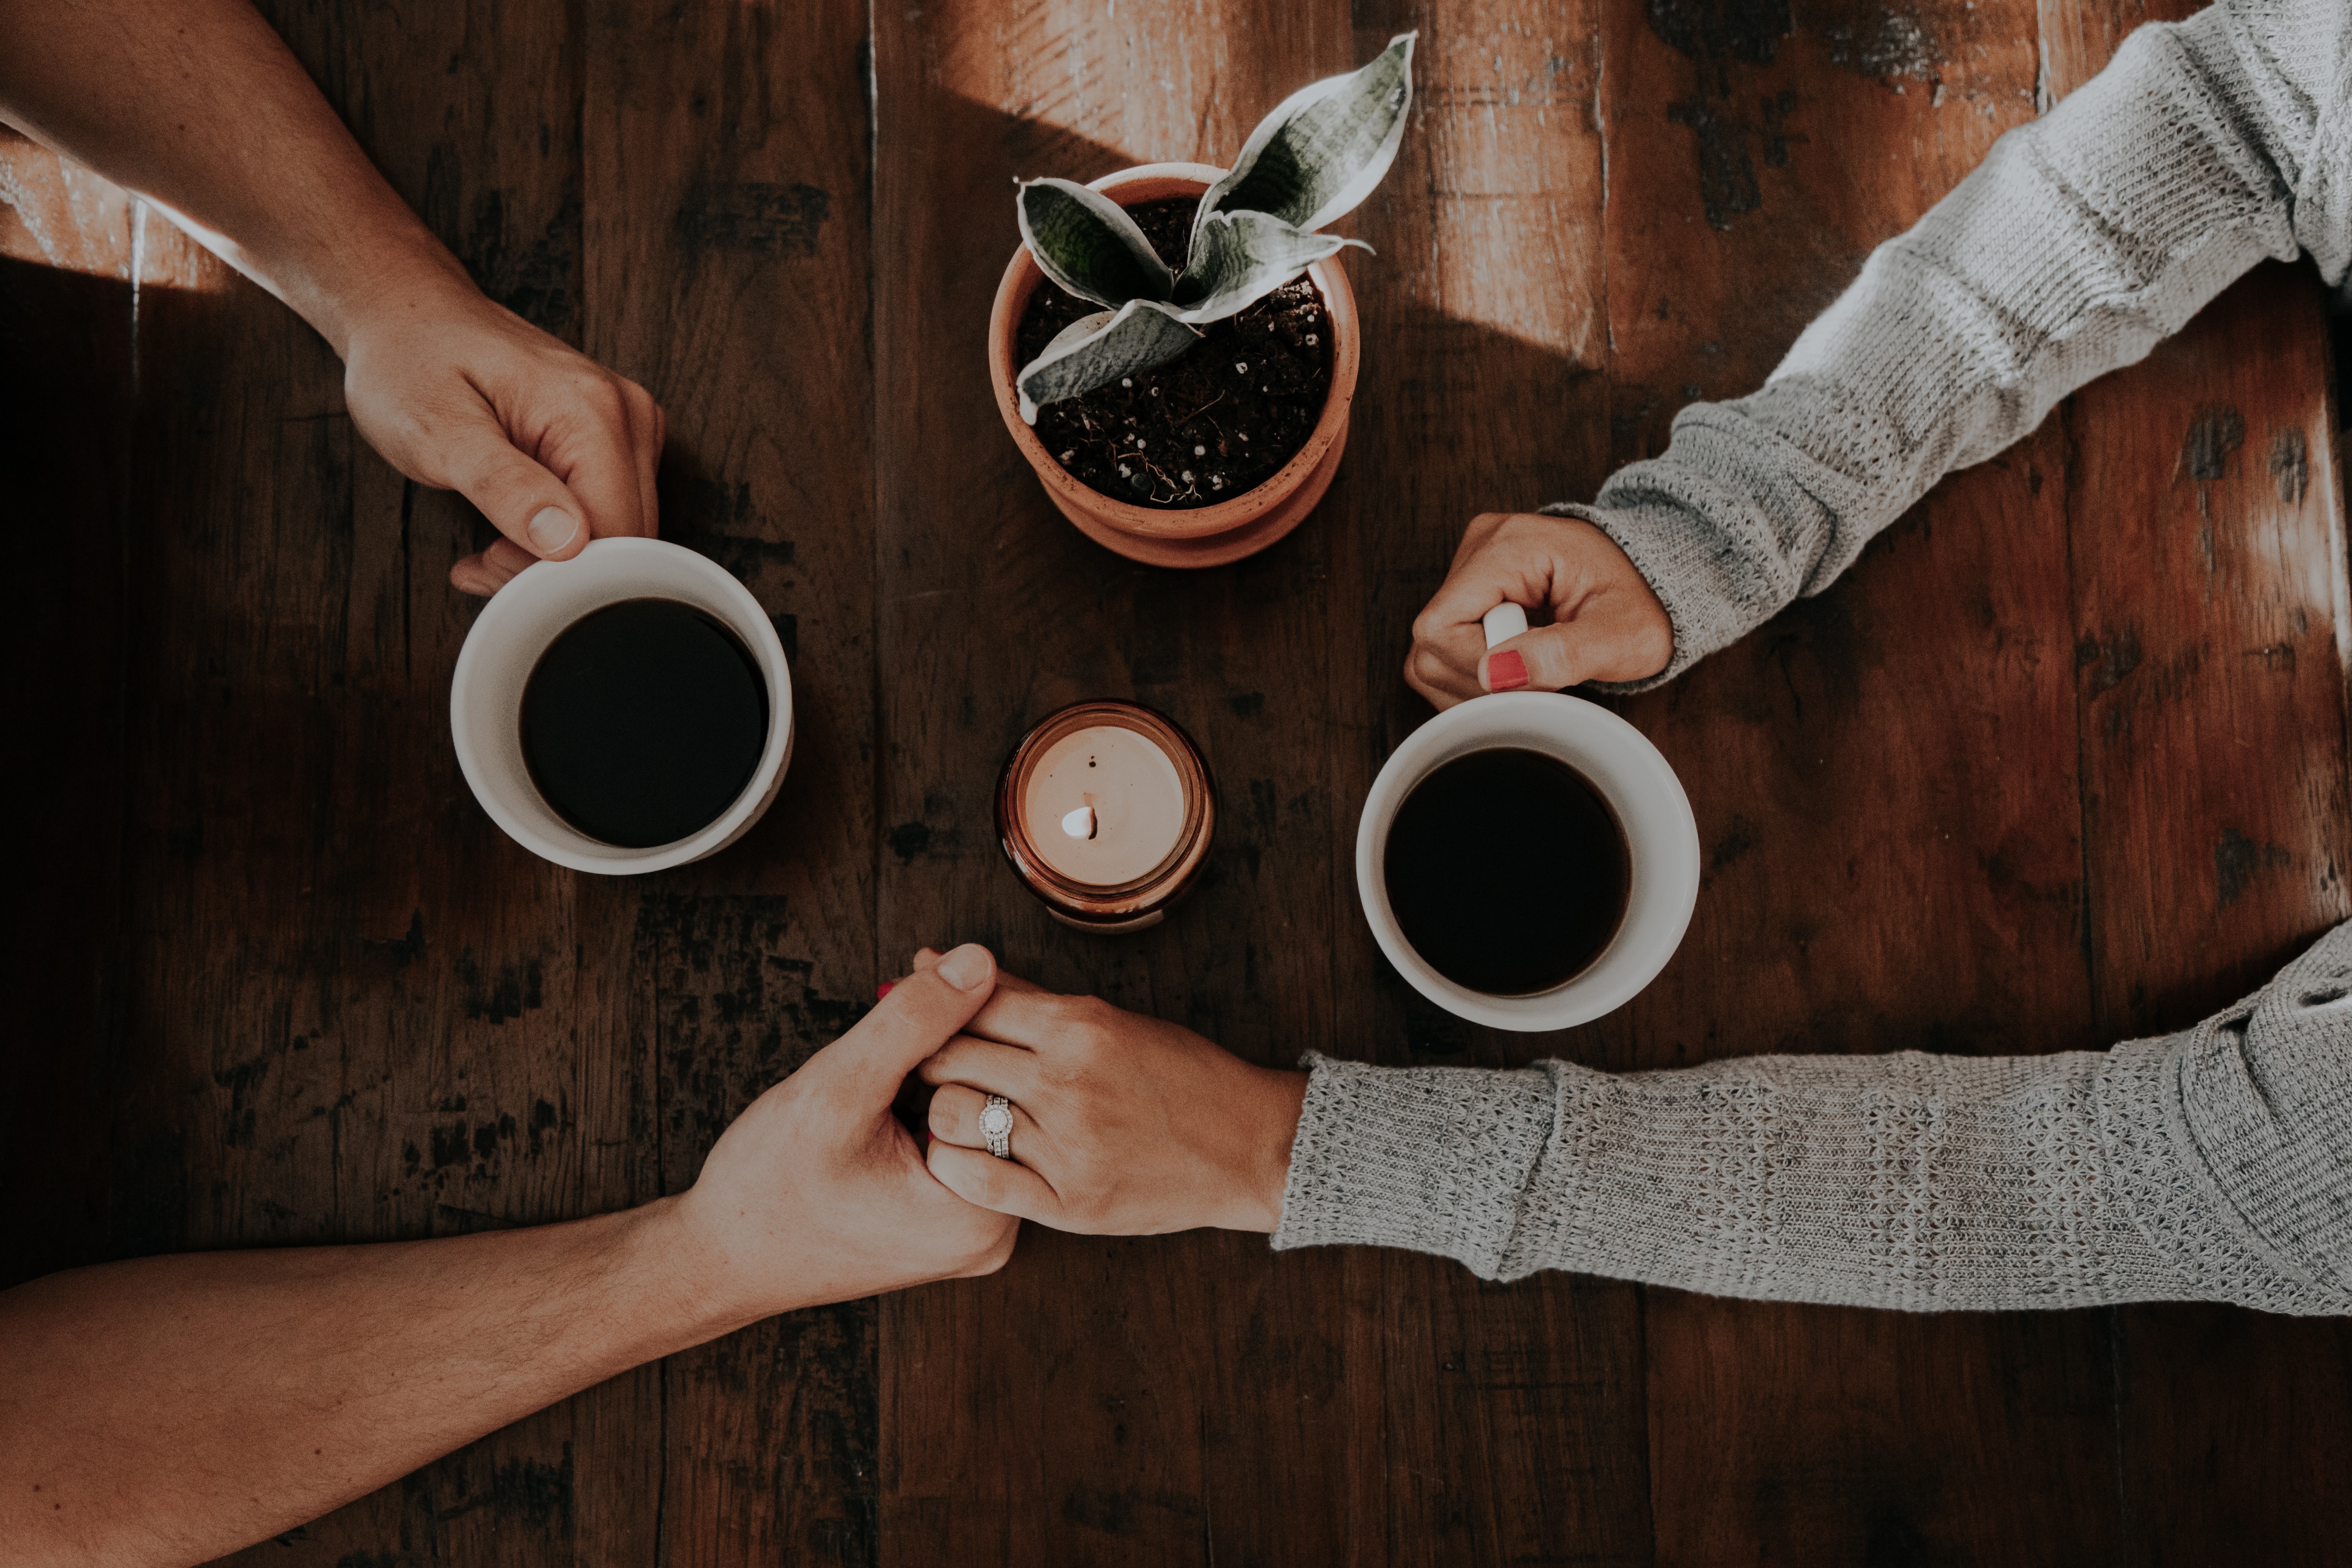 A photo of a couple holding coffee mugs while holding hands | Source: Unsplash